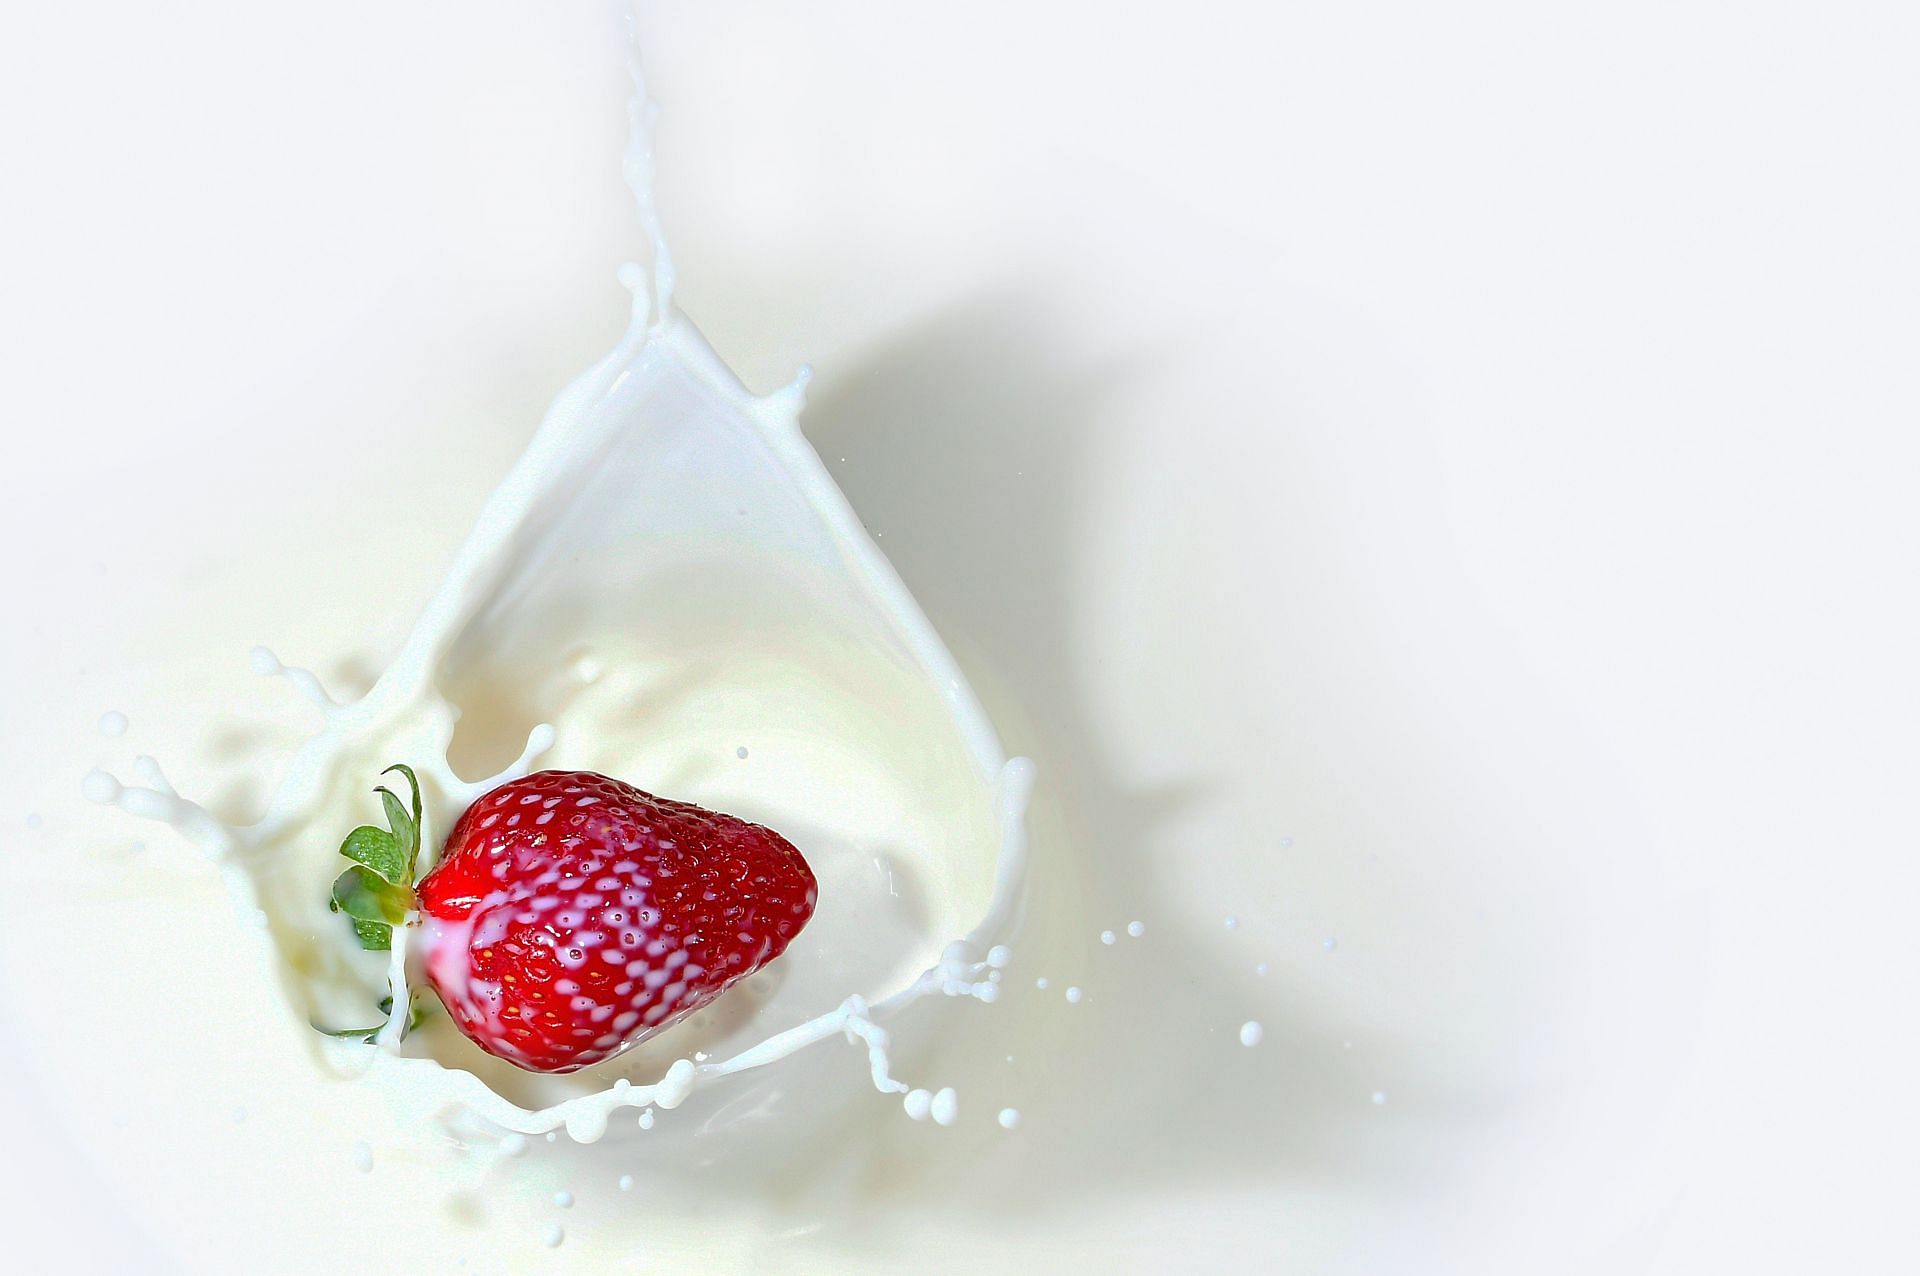 Is oat milk bad for you? Exploring downsides (image sourced via Pexels / Photo by adonyi)